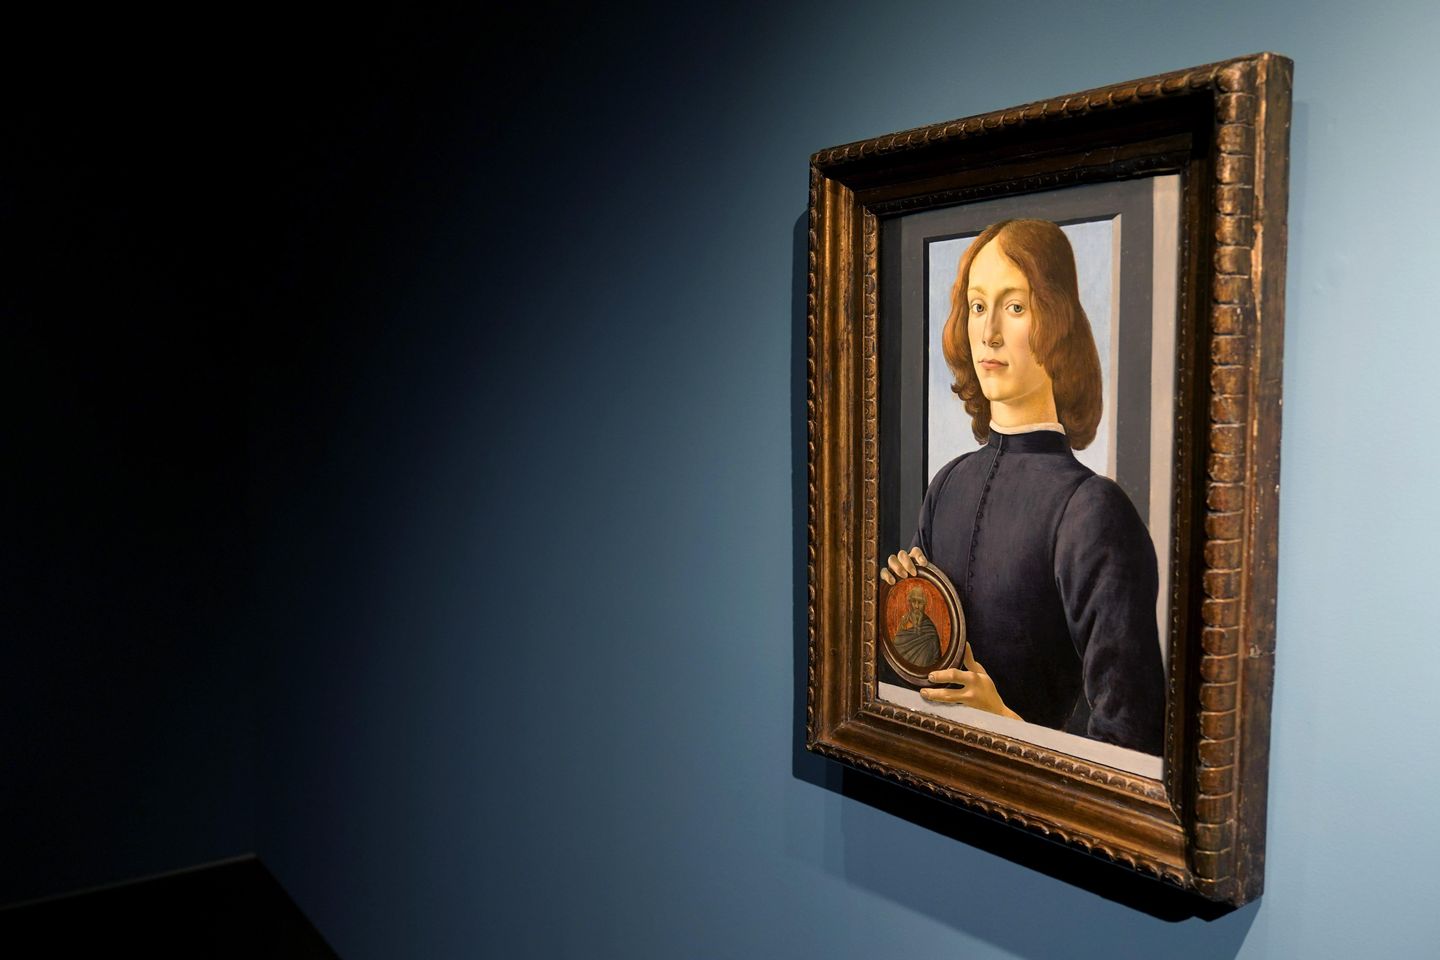 Portrait by Renaissance master expected to wing previous $80M